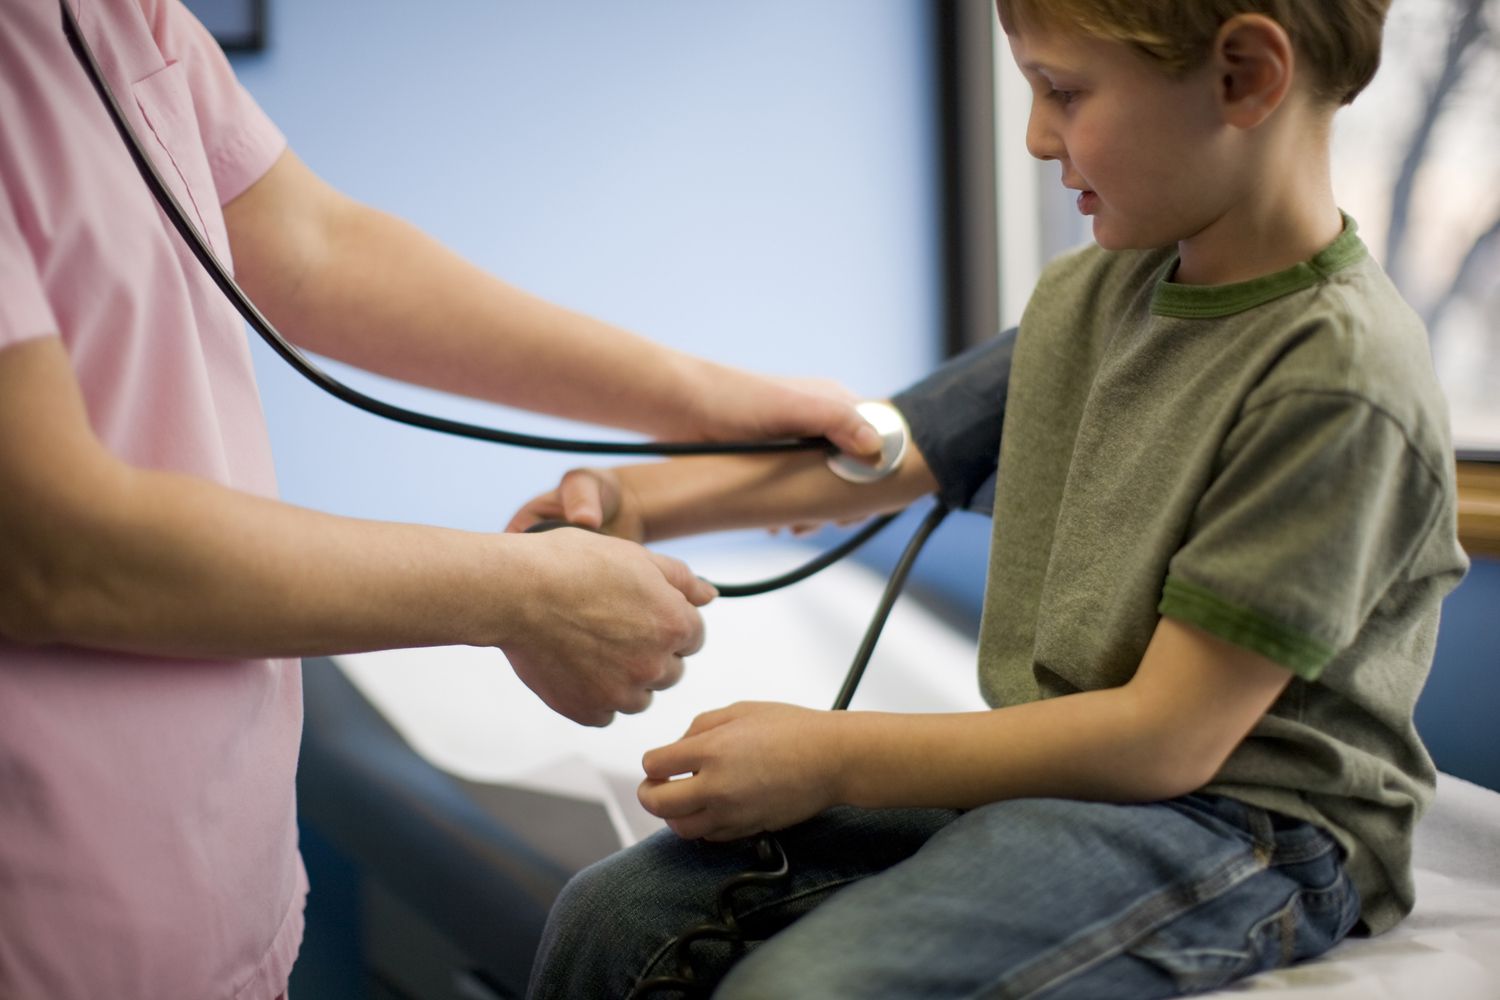 When and How to Measure Blood Pressure in Children